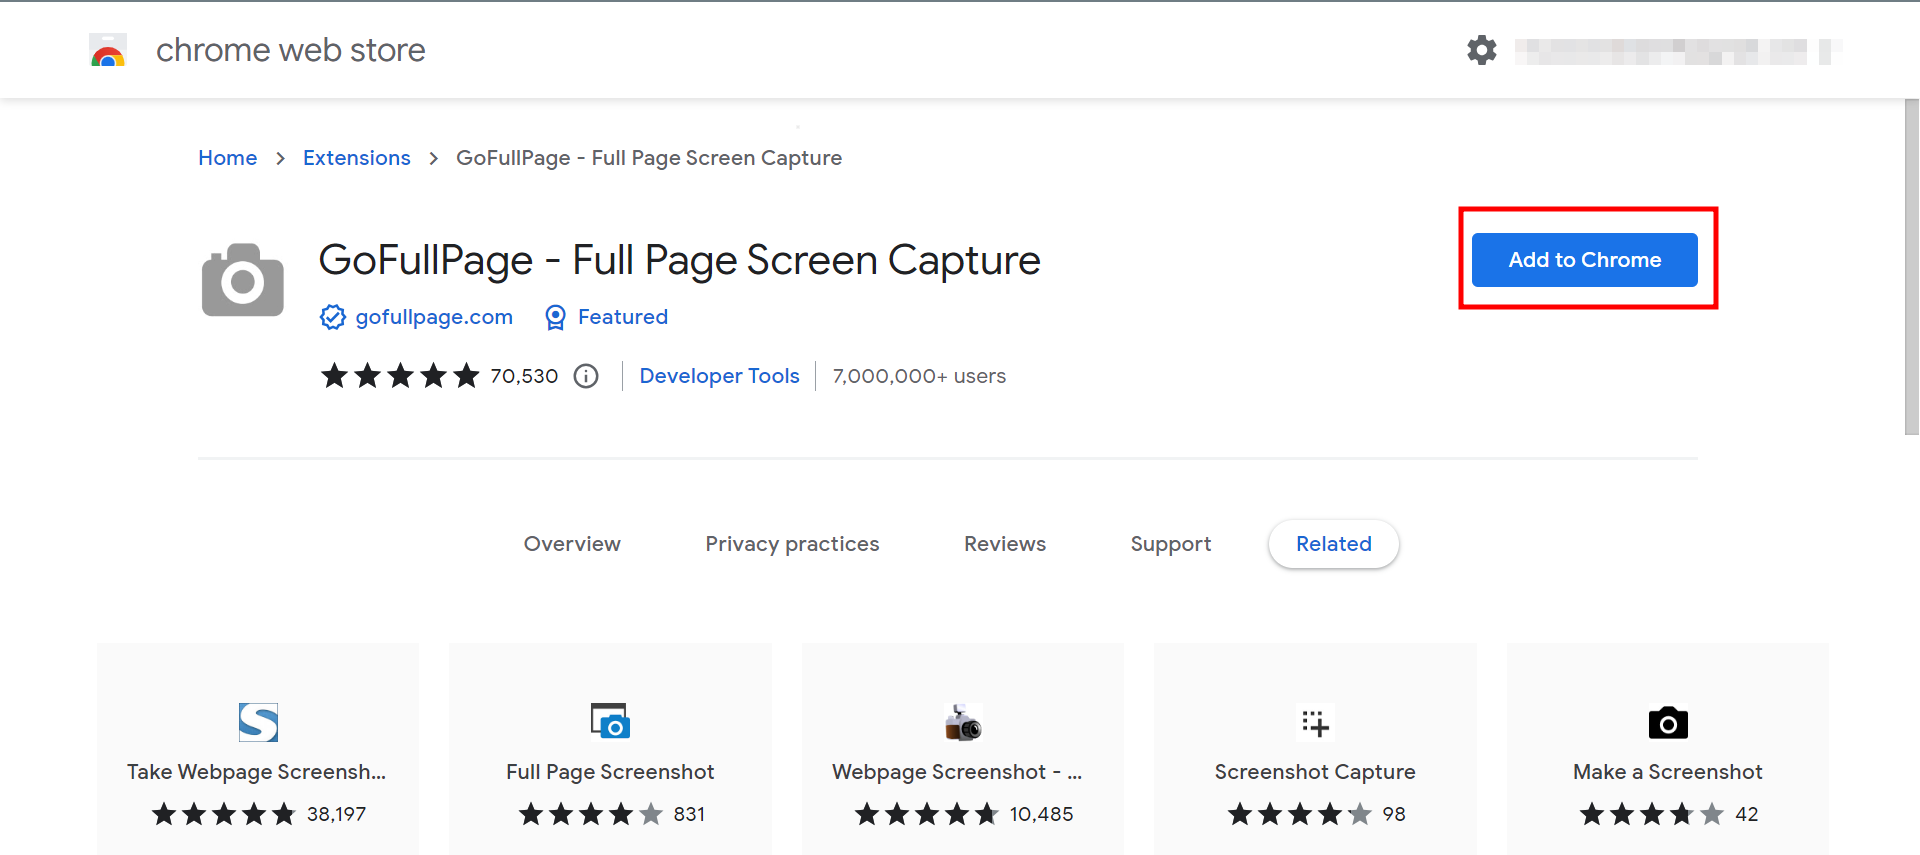 Visit the Chrome Web Store and click Add to Chrome for GoFullPage